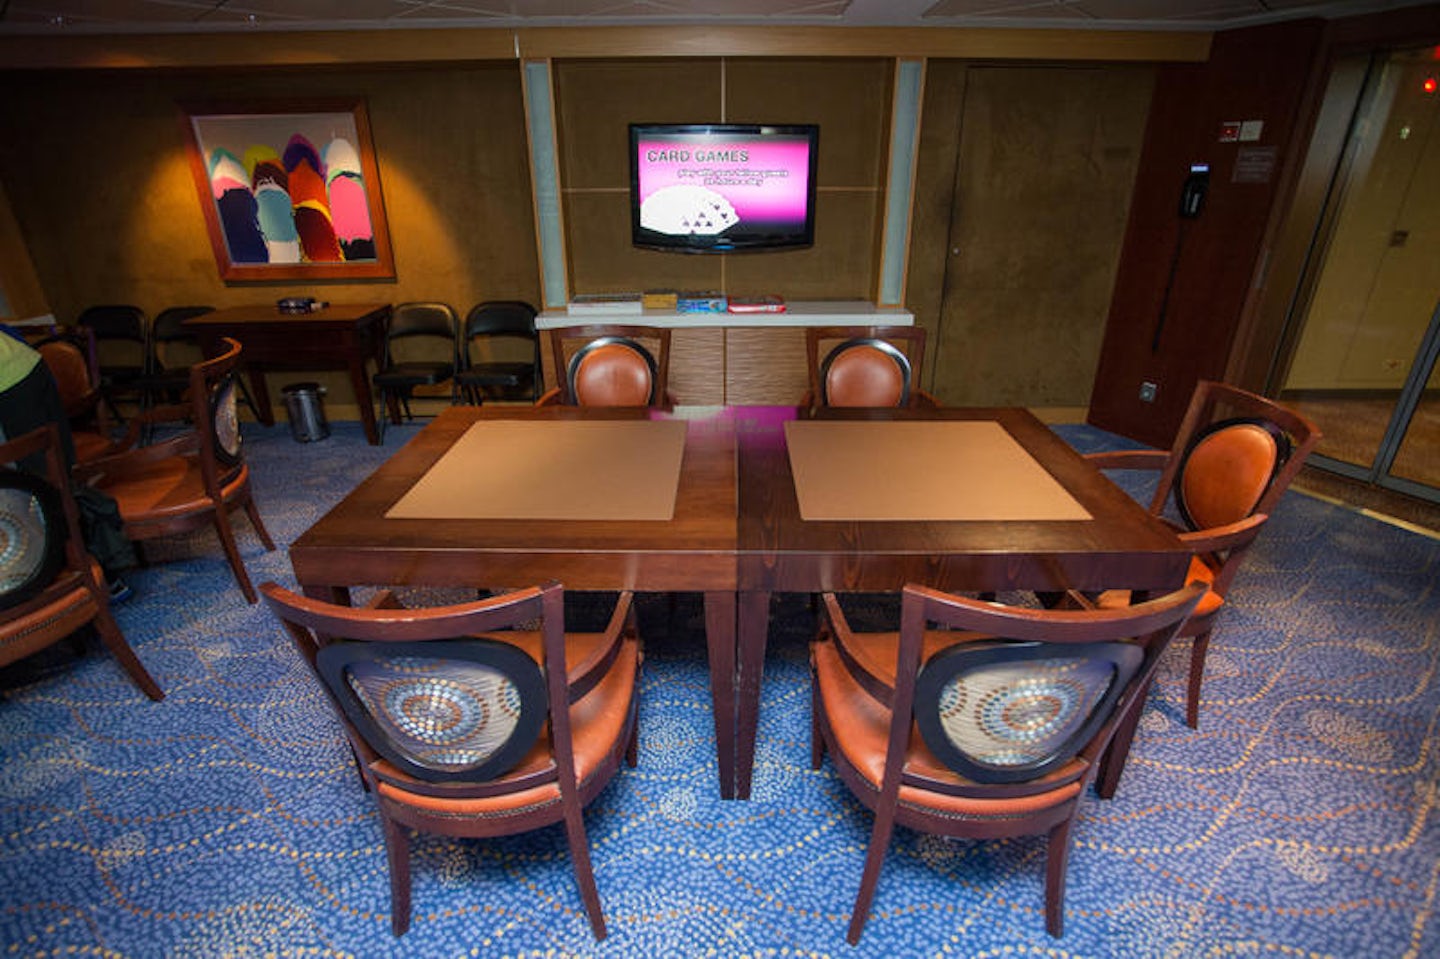 The Card Room on Celebrity Solstice